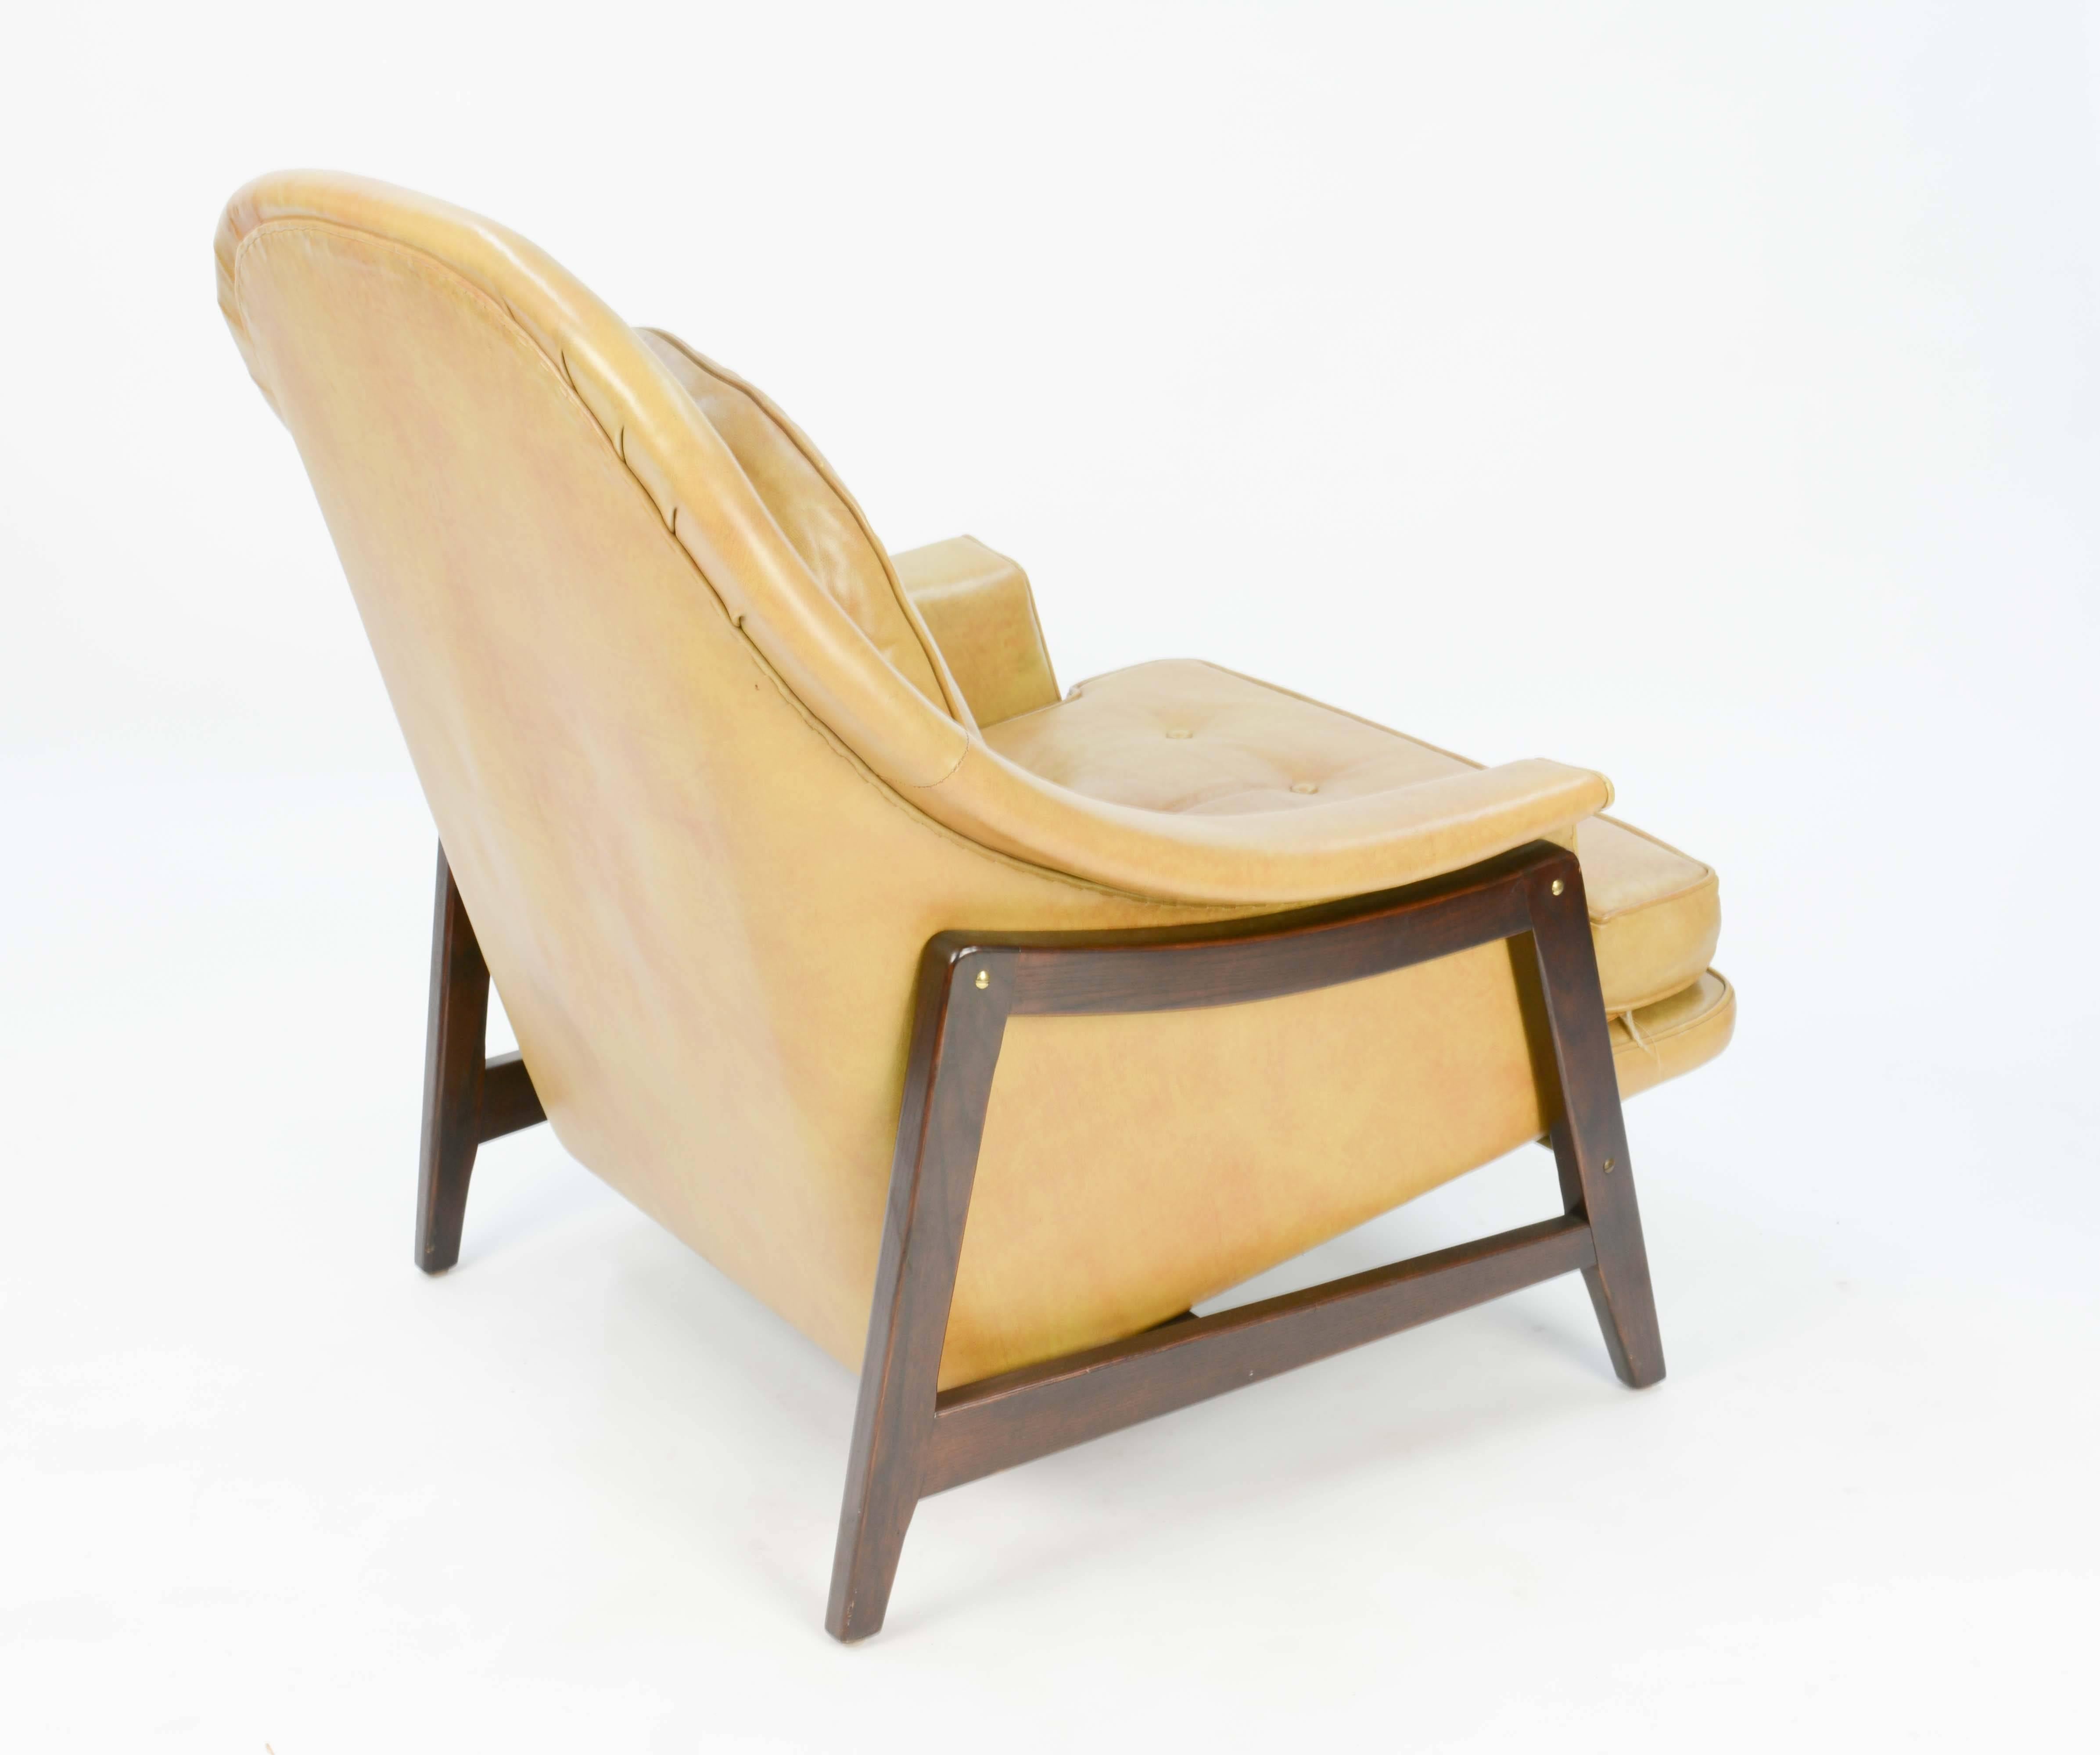 Edward Wormley's Signature Janus Group Club Chair and Ottoman for Dunbar In Good Condition For Sale In Portland, OR